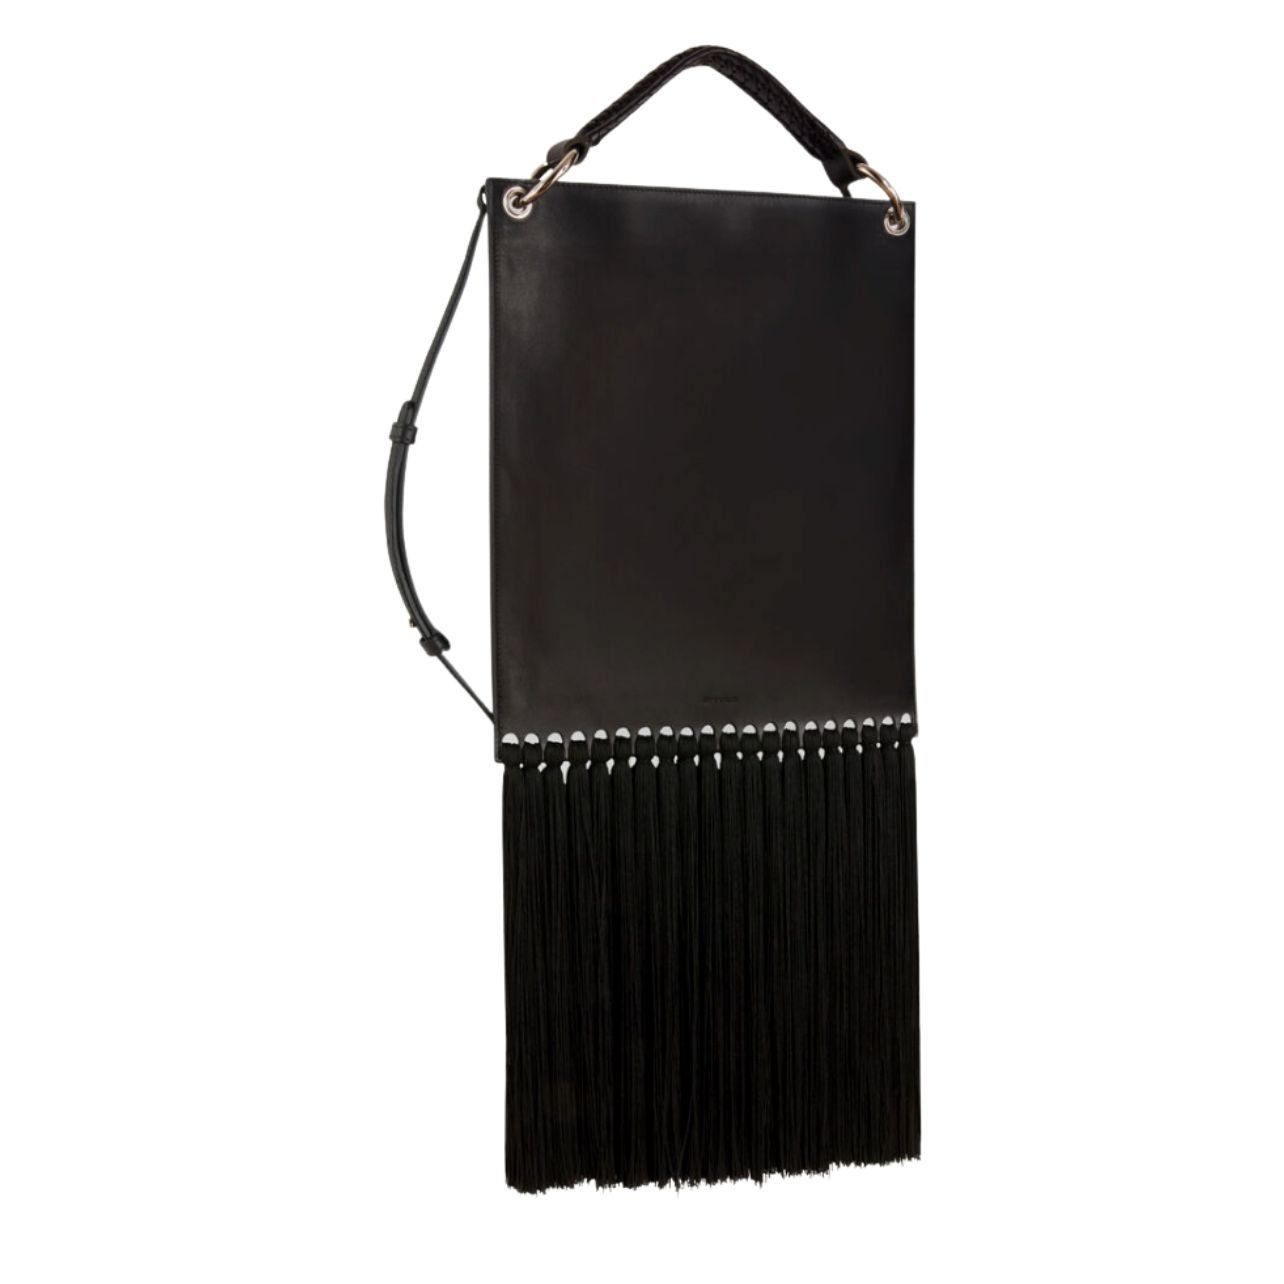 Etro black leather bag with top handle and fringe detail